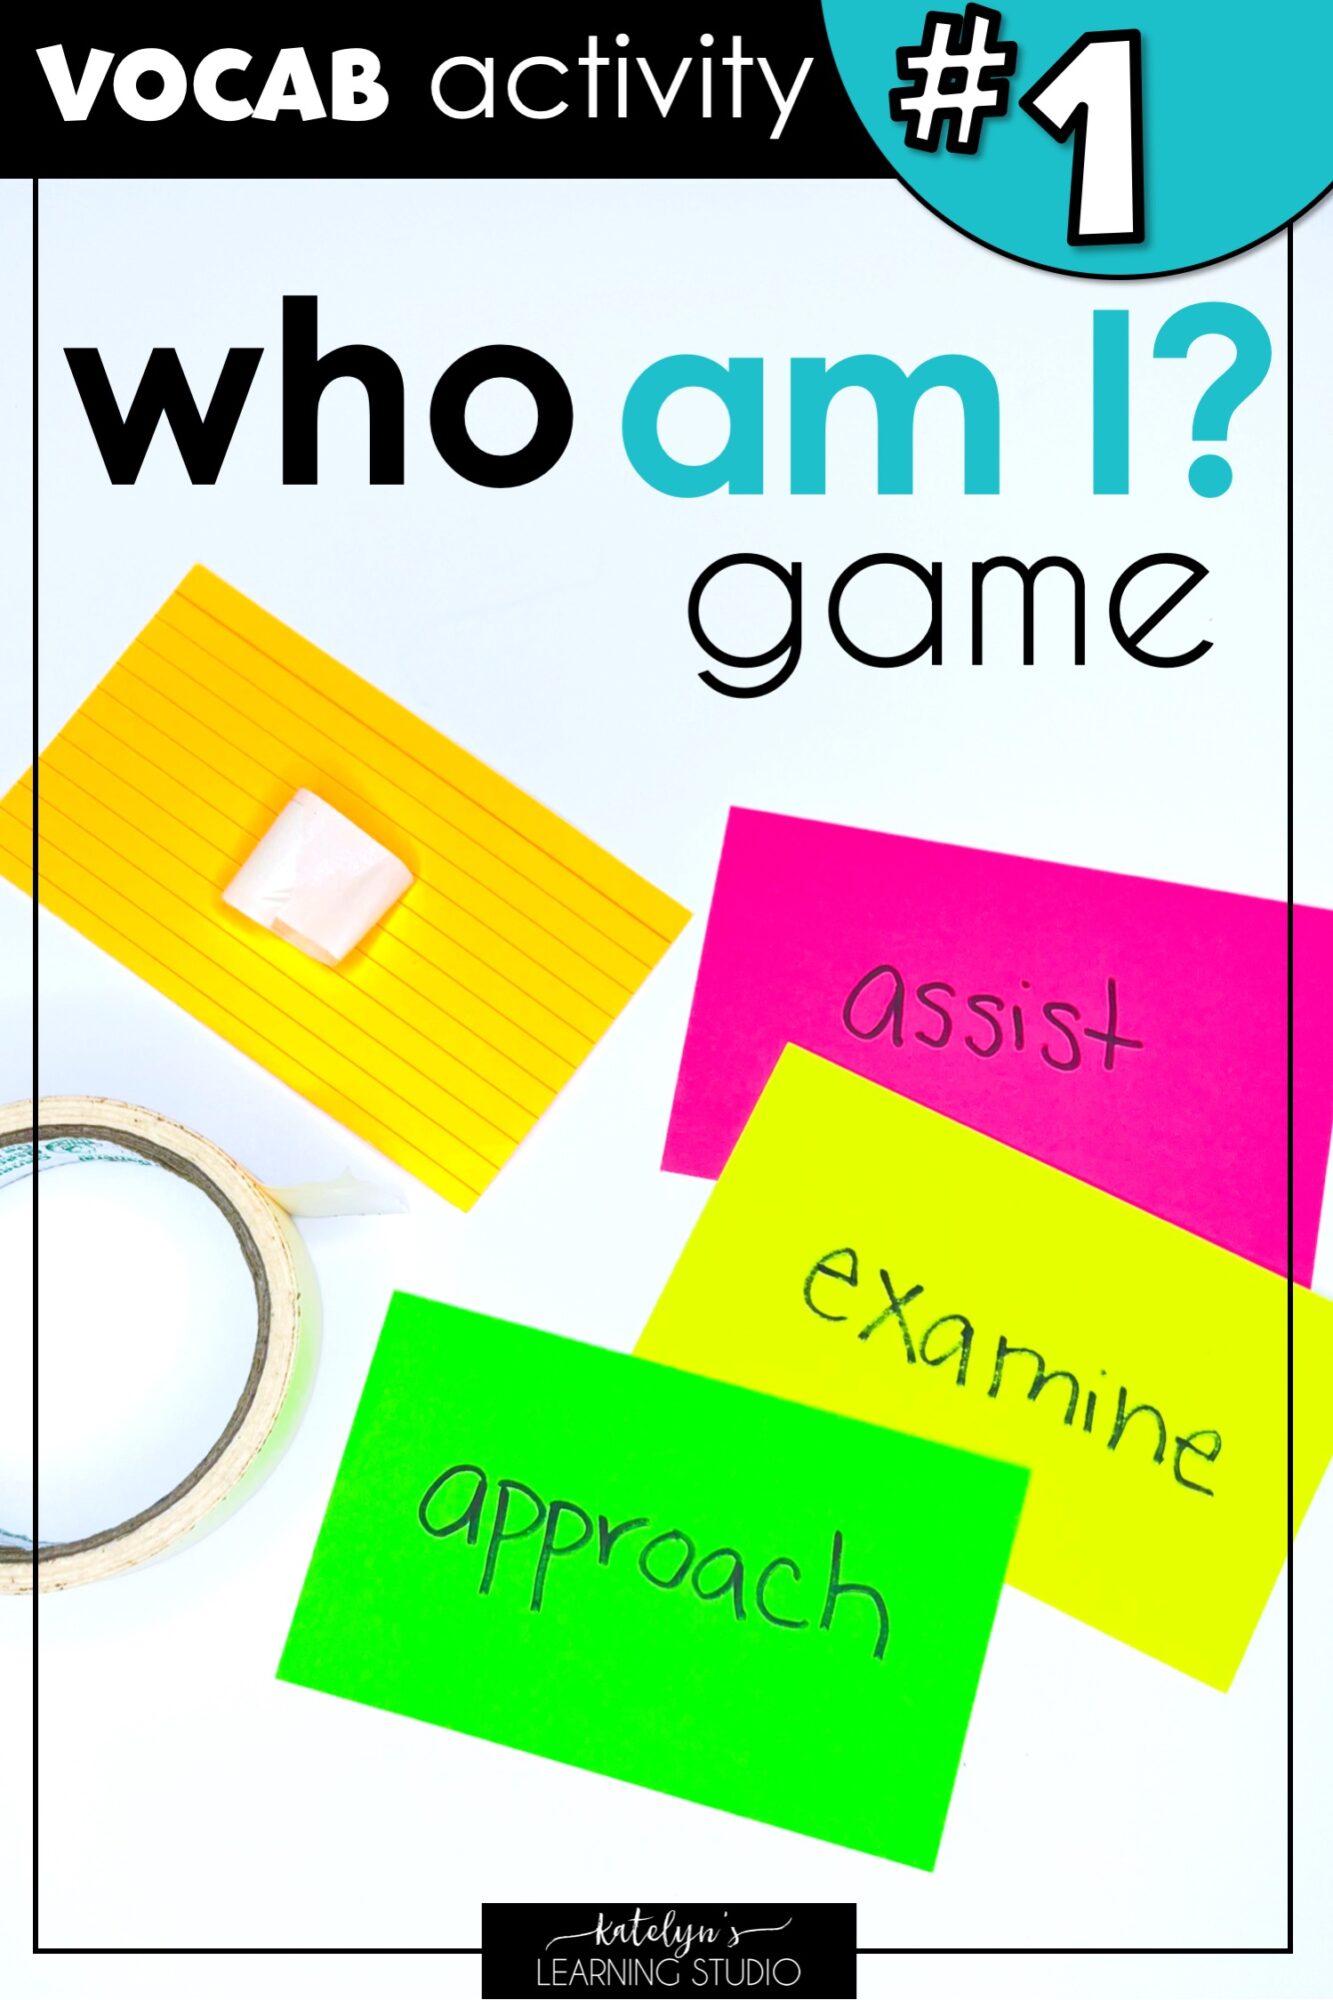 8 Great Vocabulary Activities and Games for Building Word Understanding